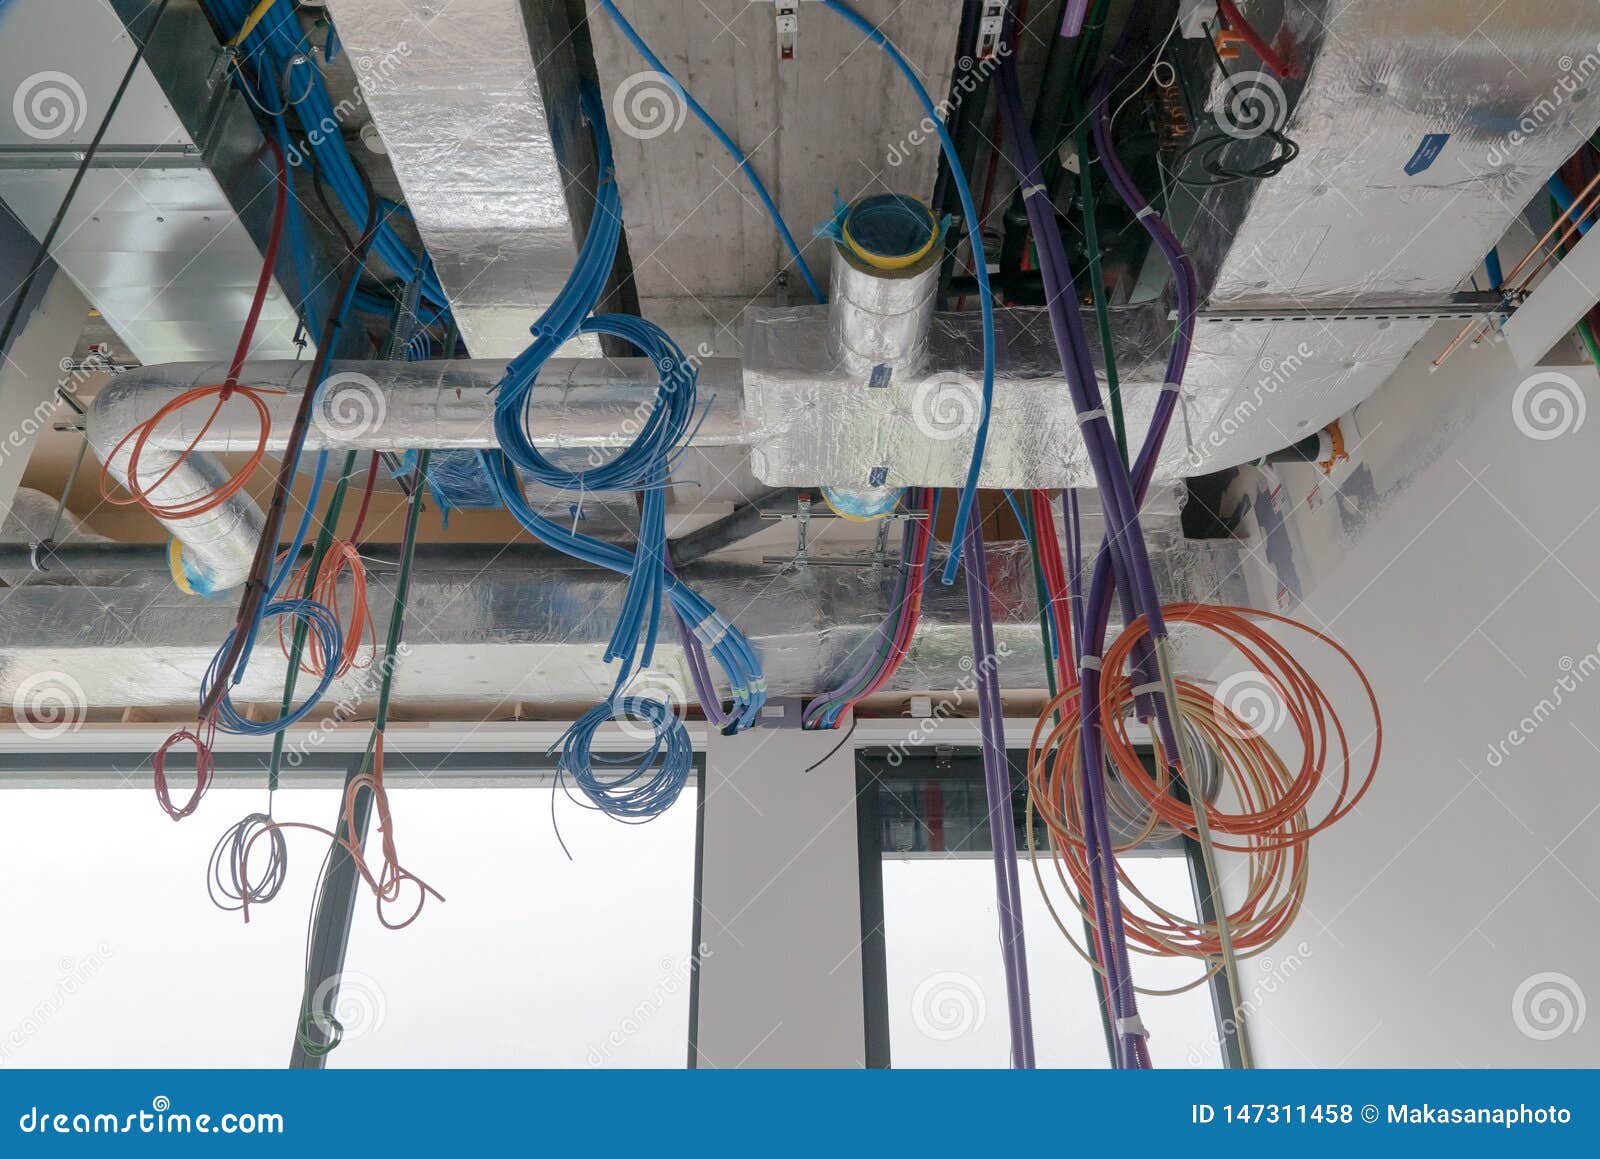 Colorful Electrical Cables Hanging From The Ceiling In Spirals And